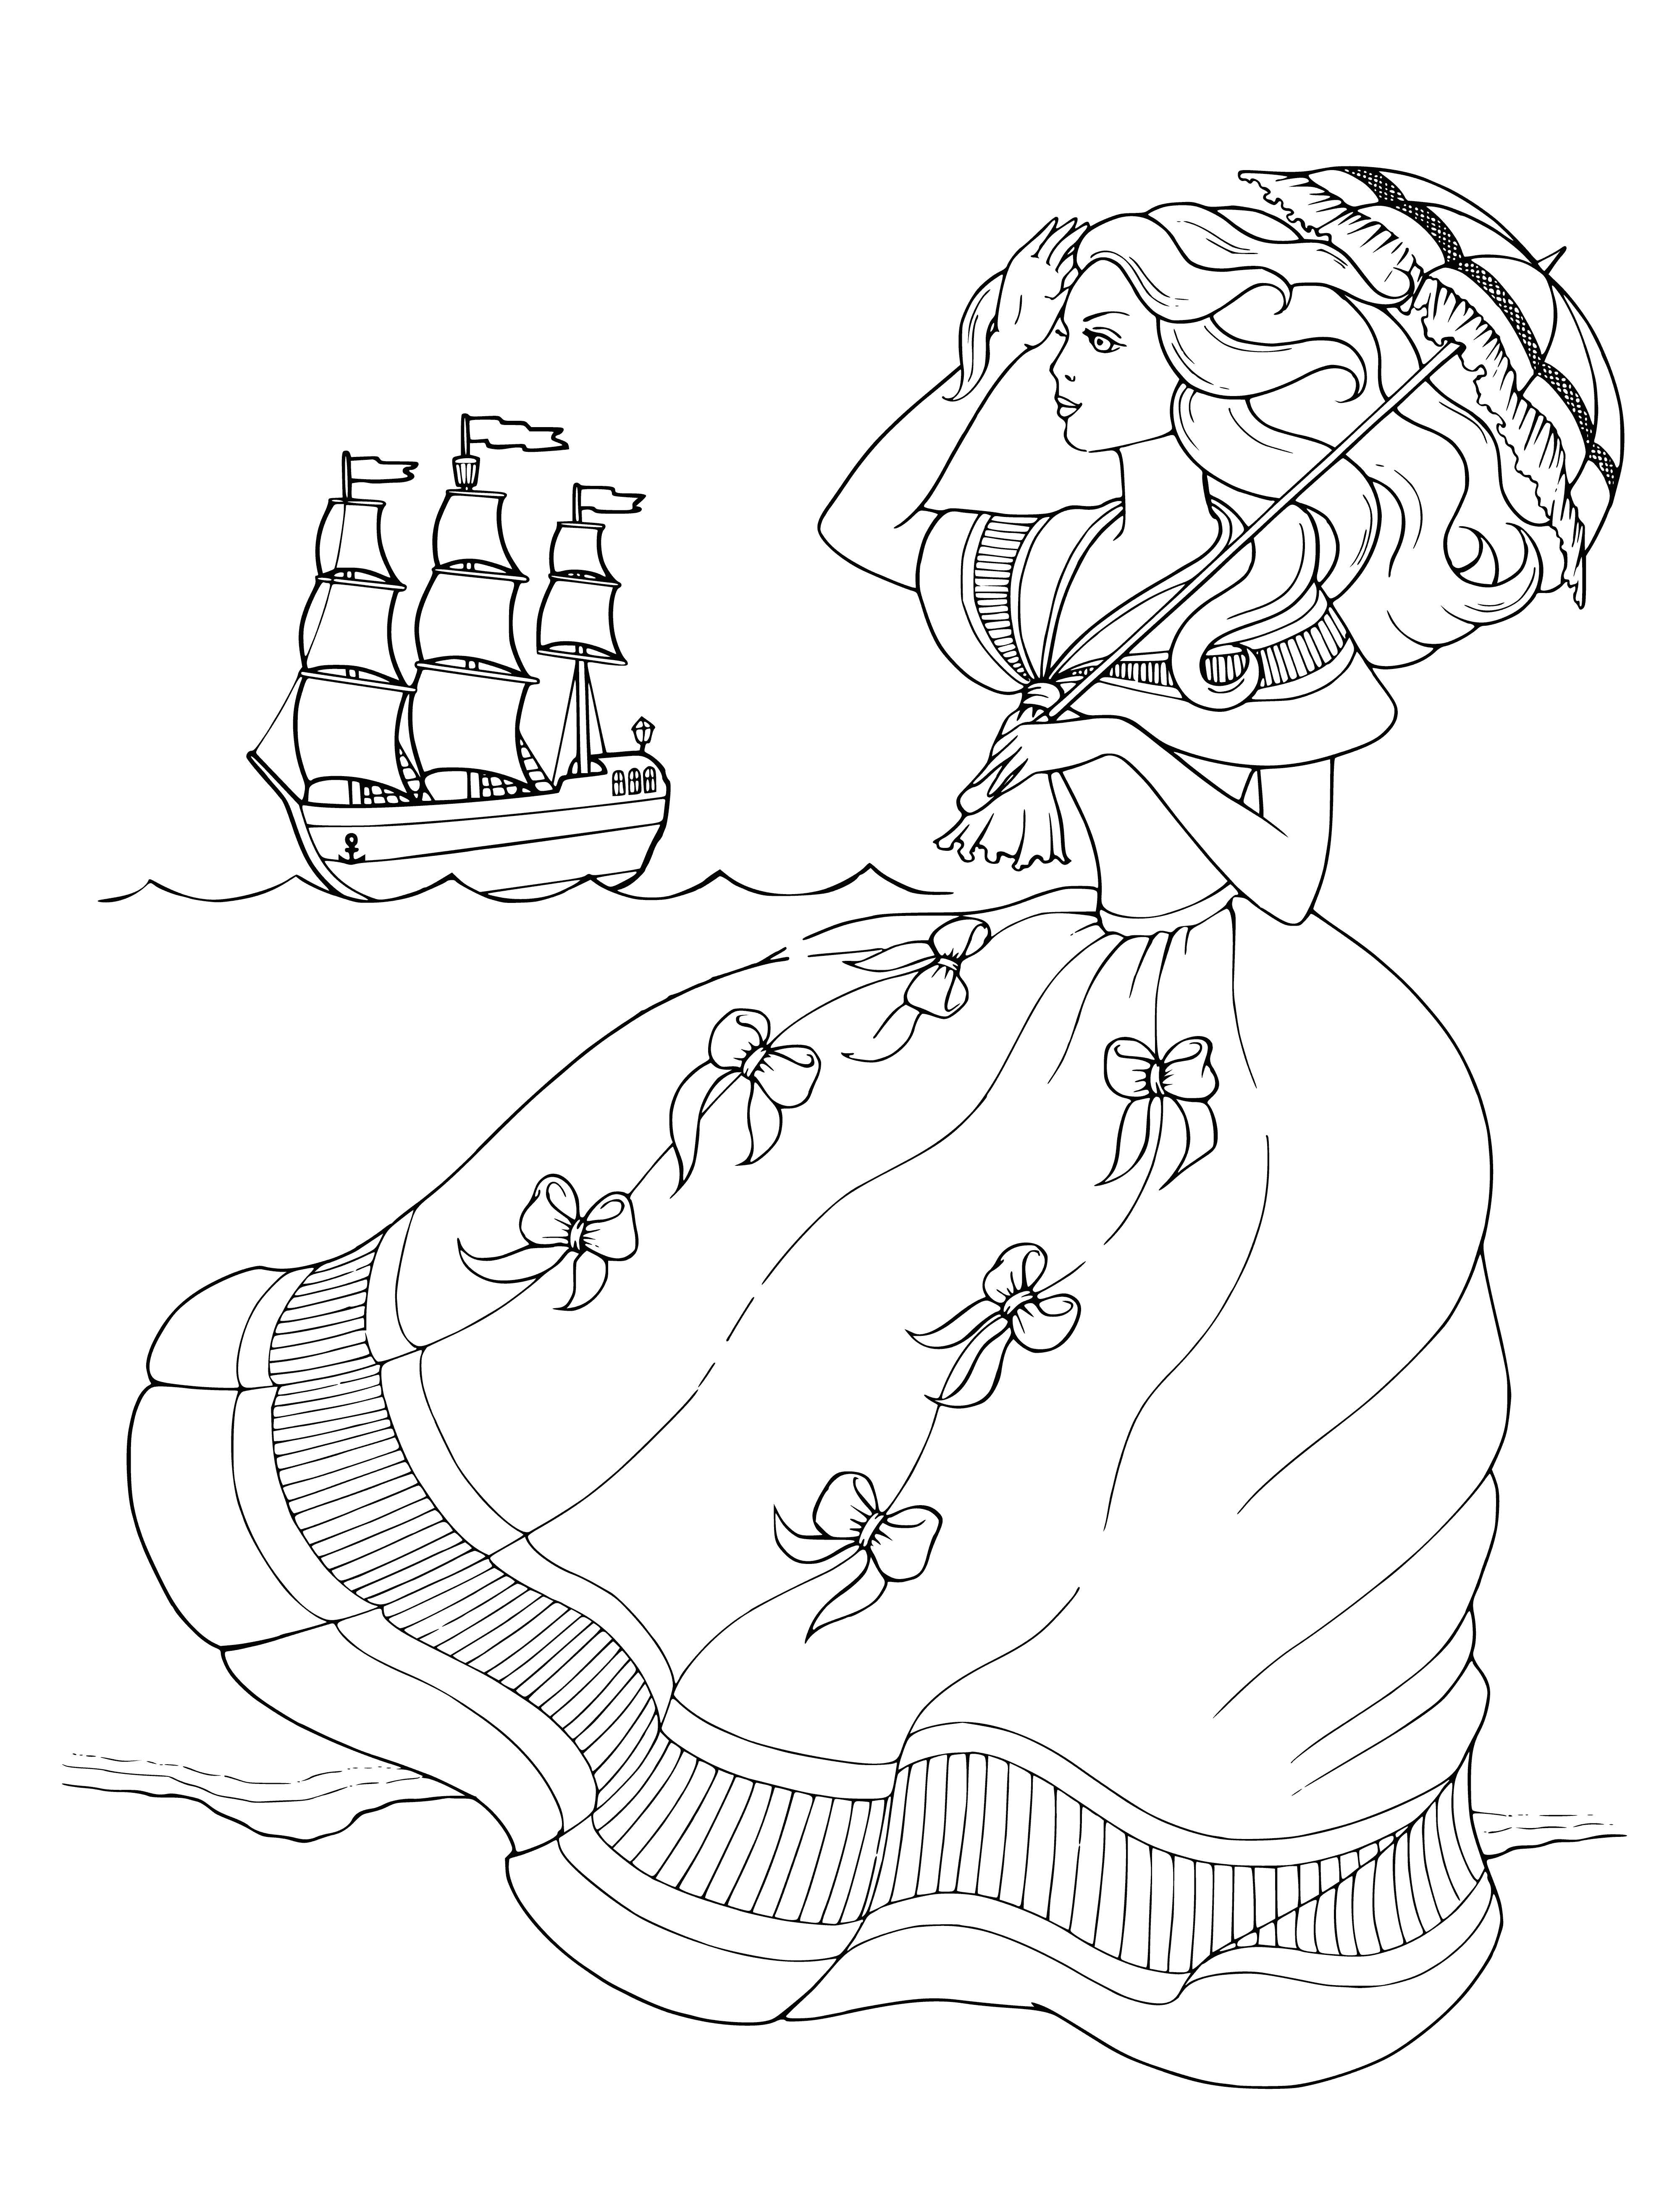 Princess by the sea coloring page